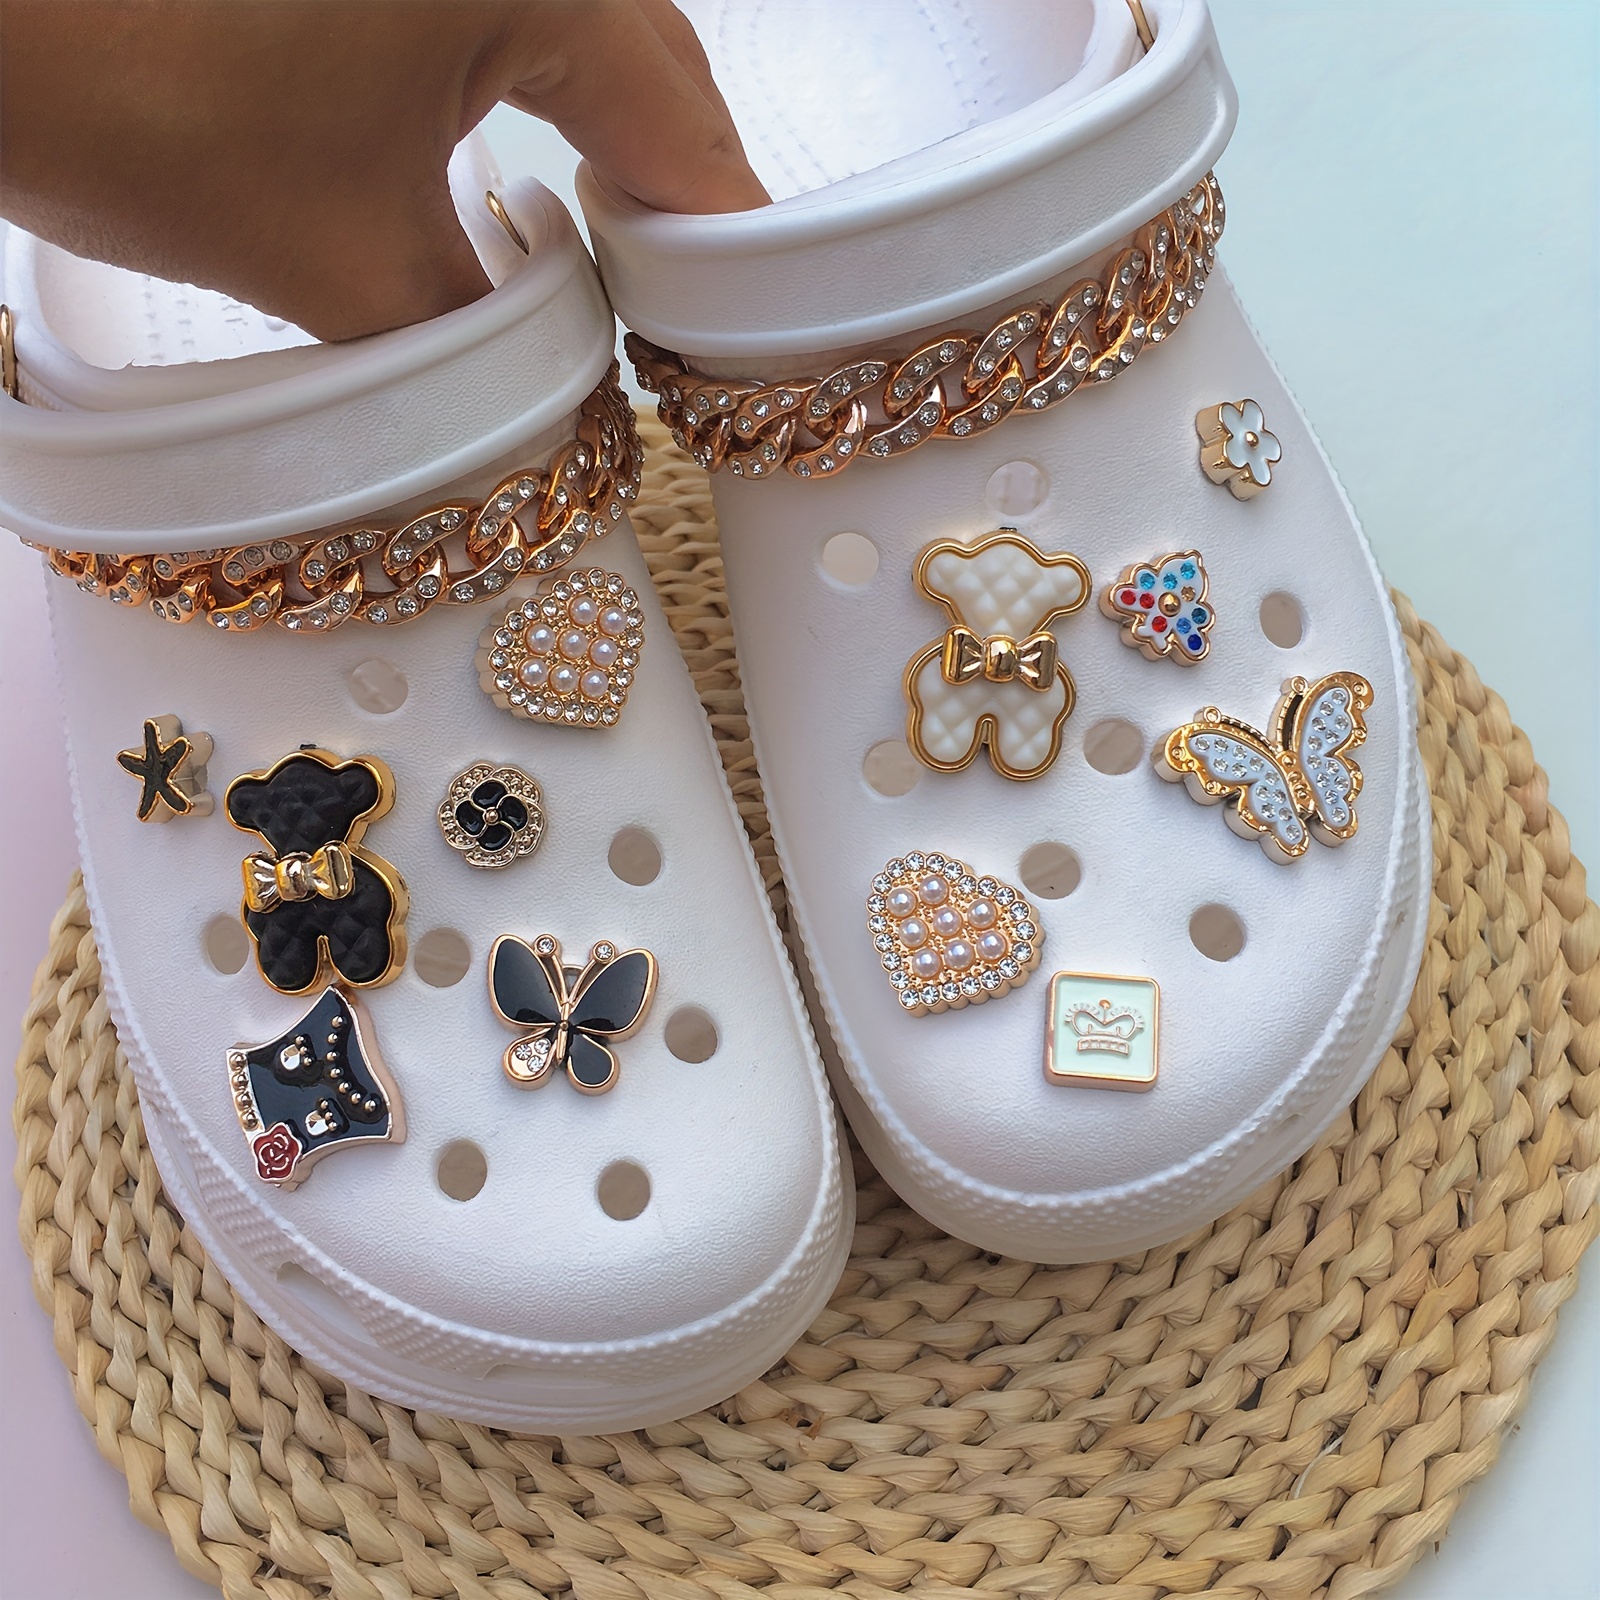 crocs with chanel charm shoes